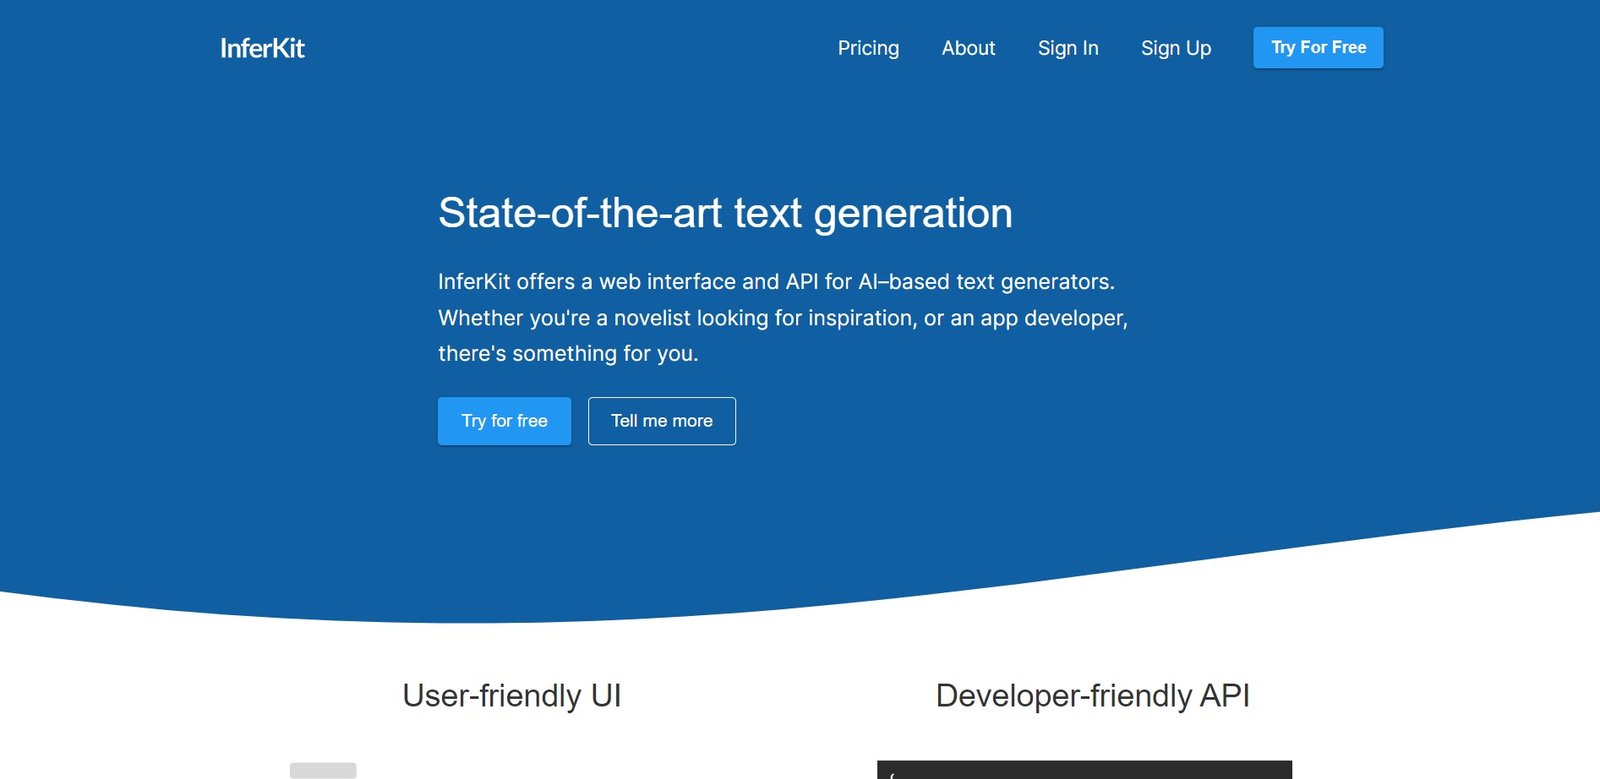 InferKit offers a web interface and API for AI-based text generators using a state-of-the-art neural network